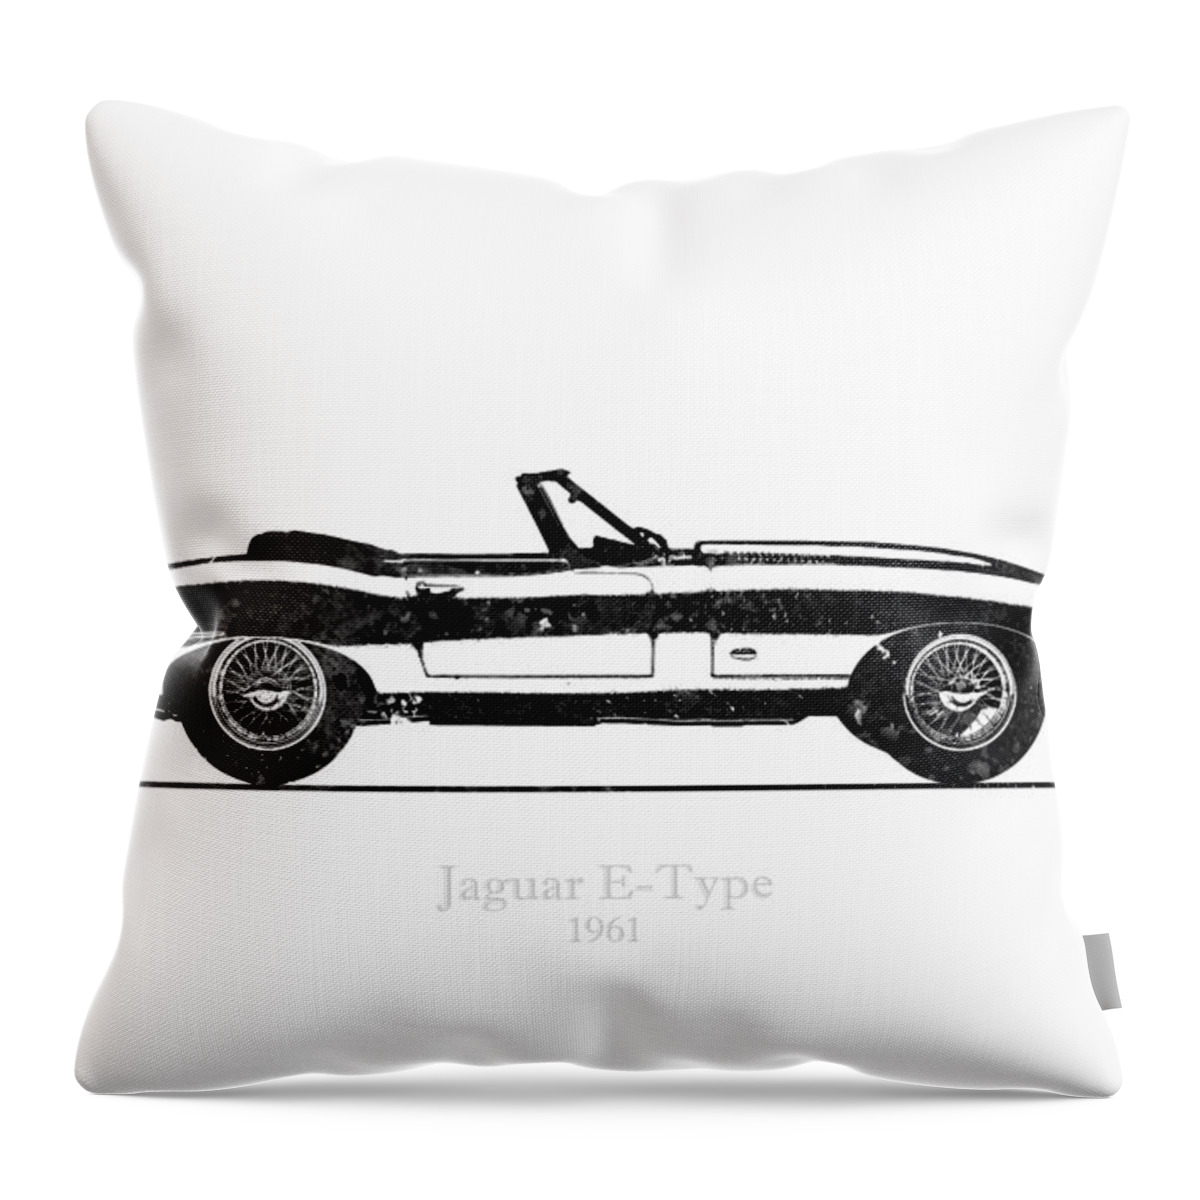 Jaguar E Type Roadster 1961 Black And White Illustration Throw Pillow For Sale By Stockphotosart Com